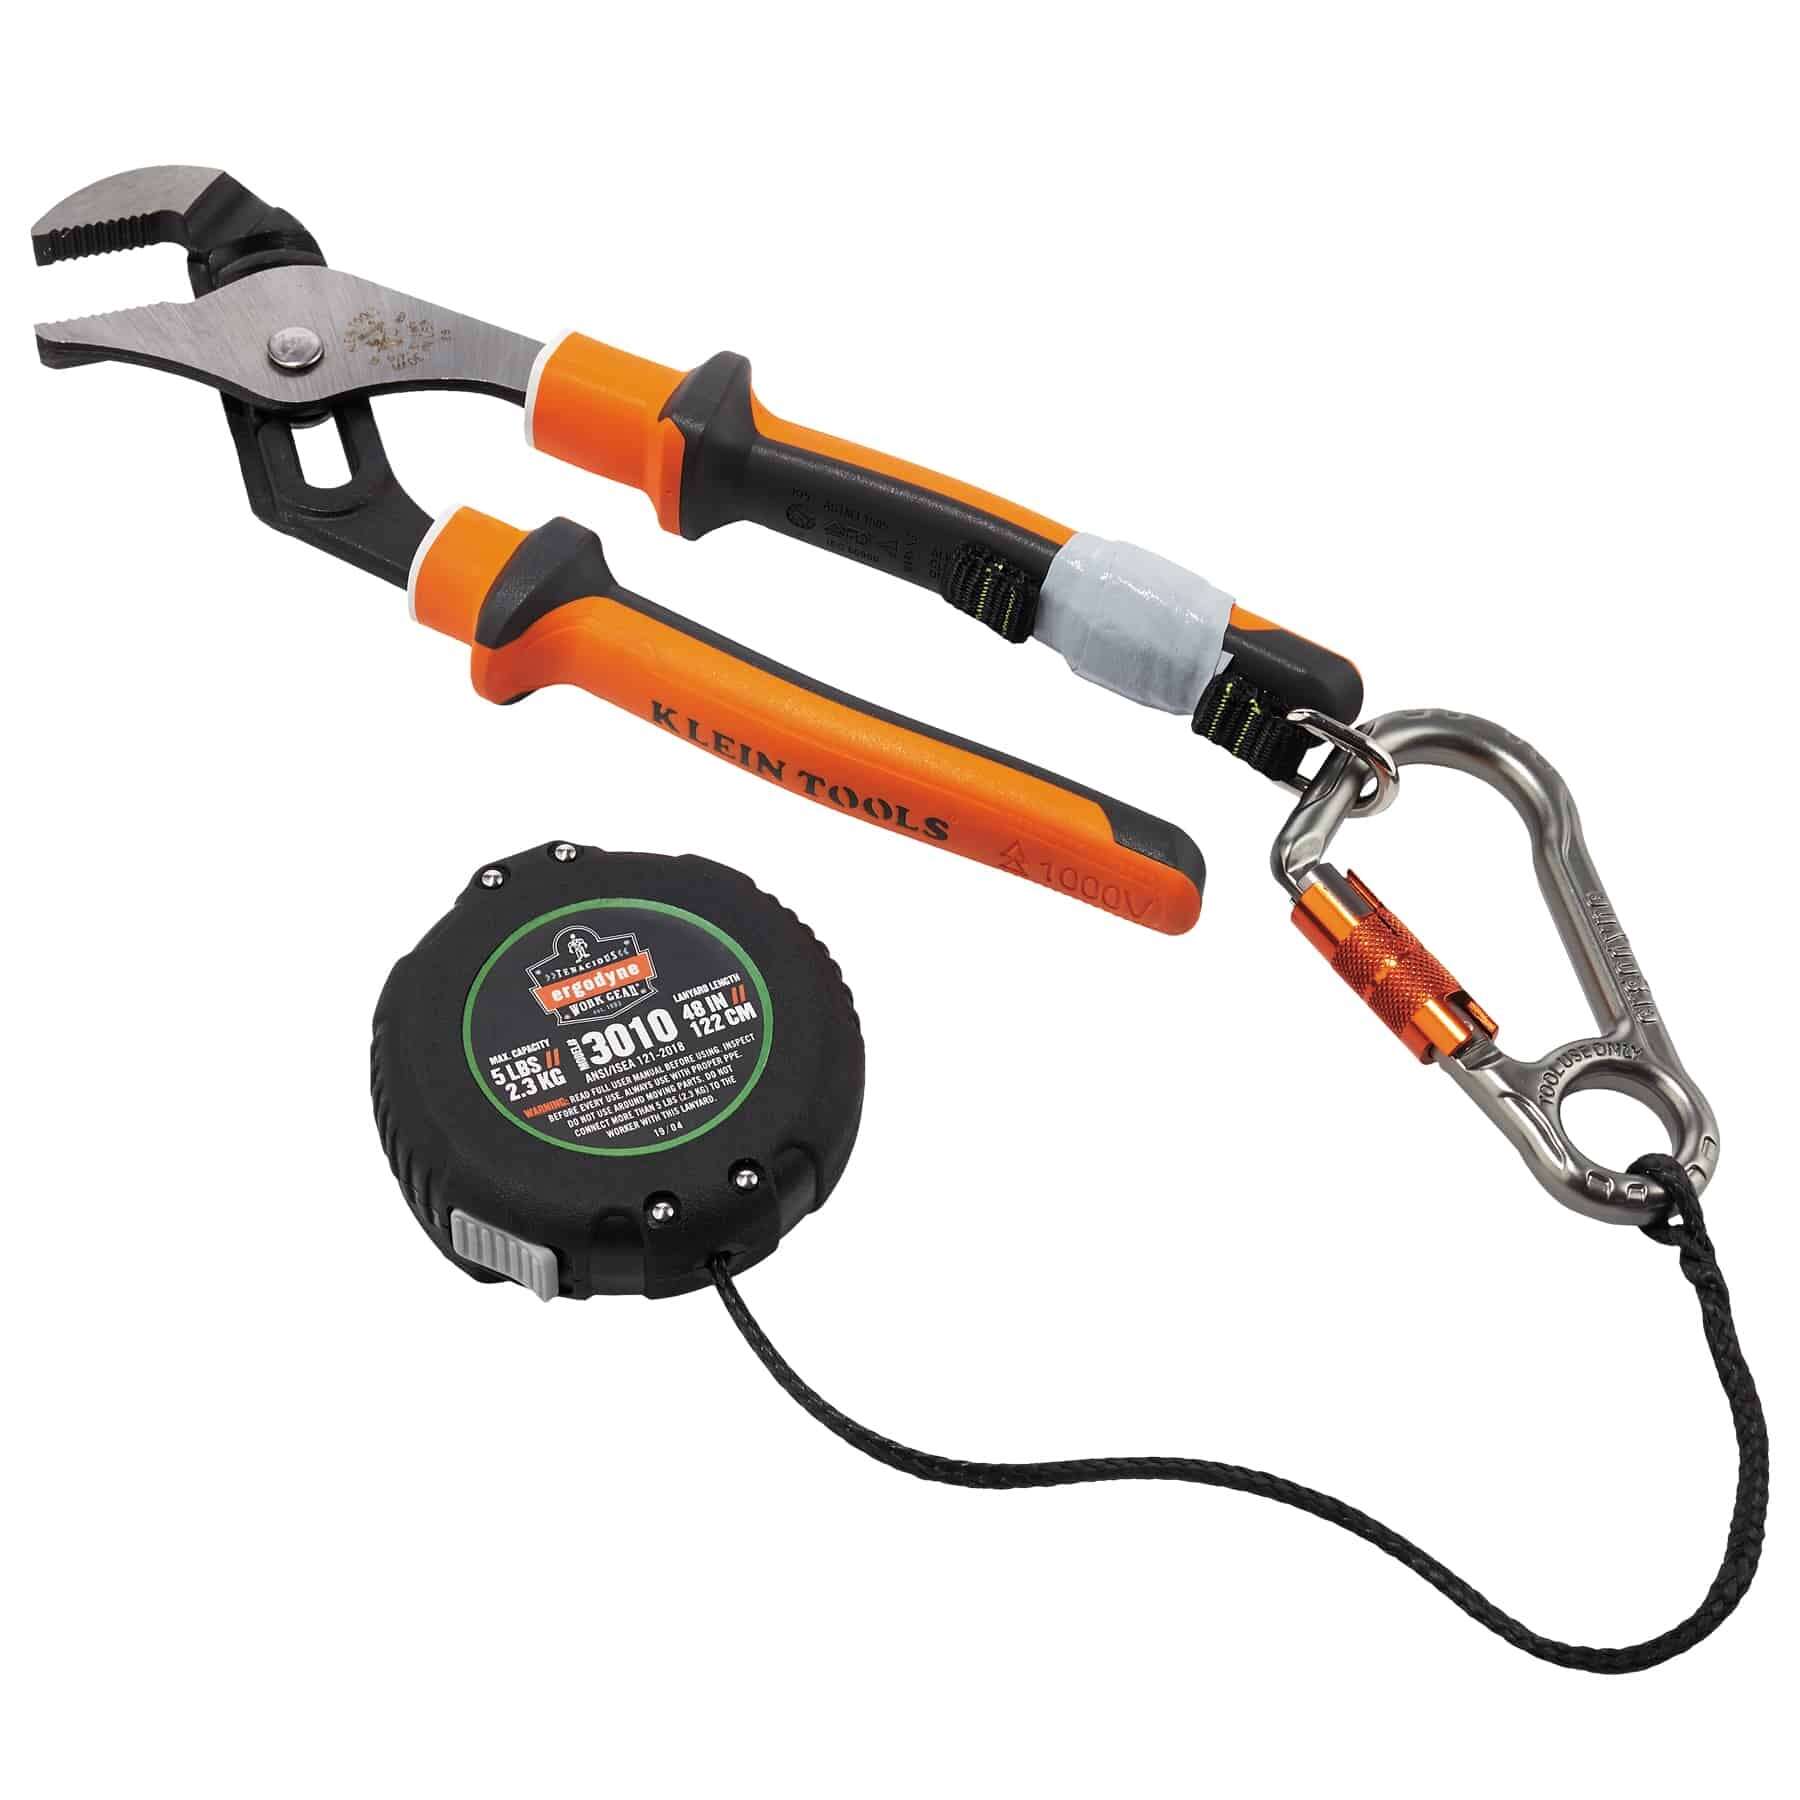 Squids 3010 Retractable Tool Lanyard with Belt Loop Clip - Premier Safety